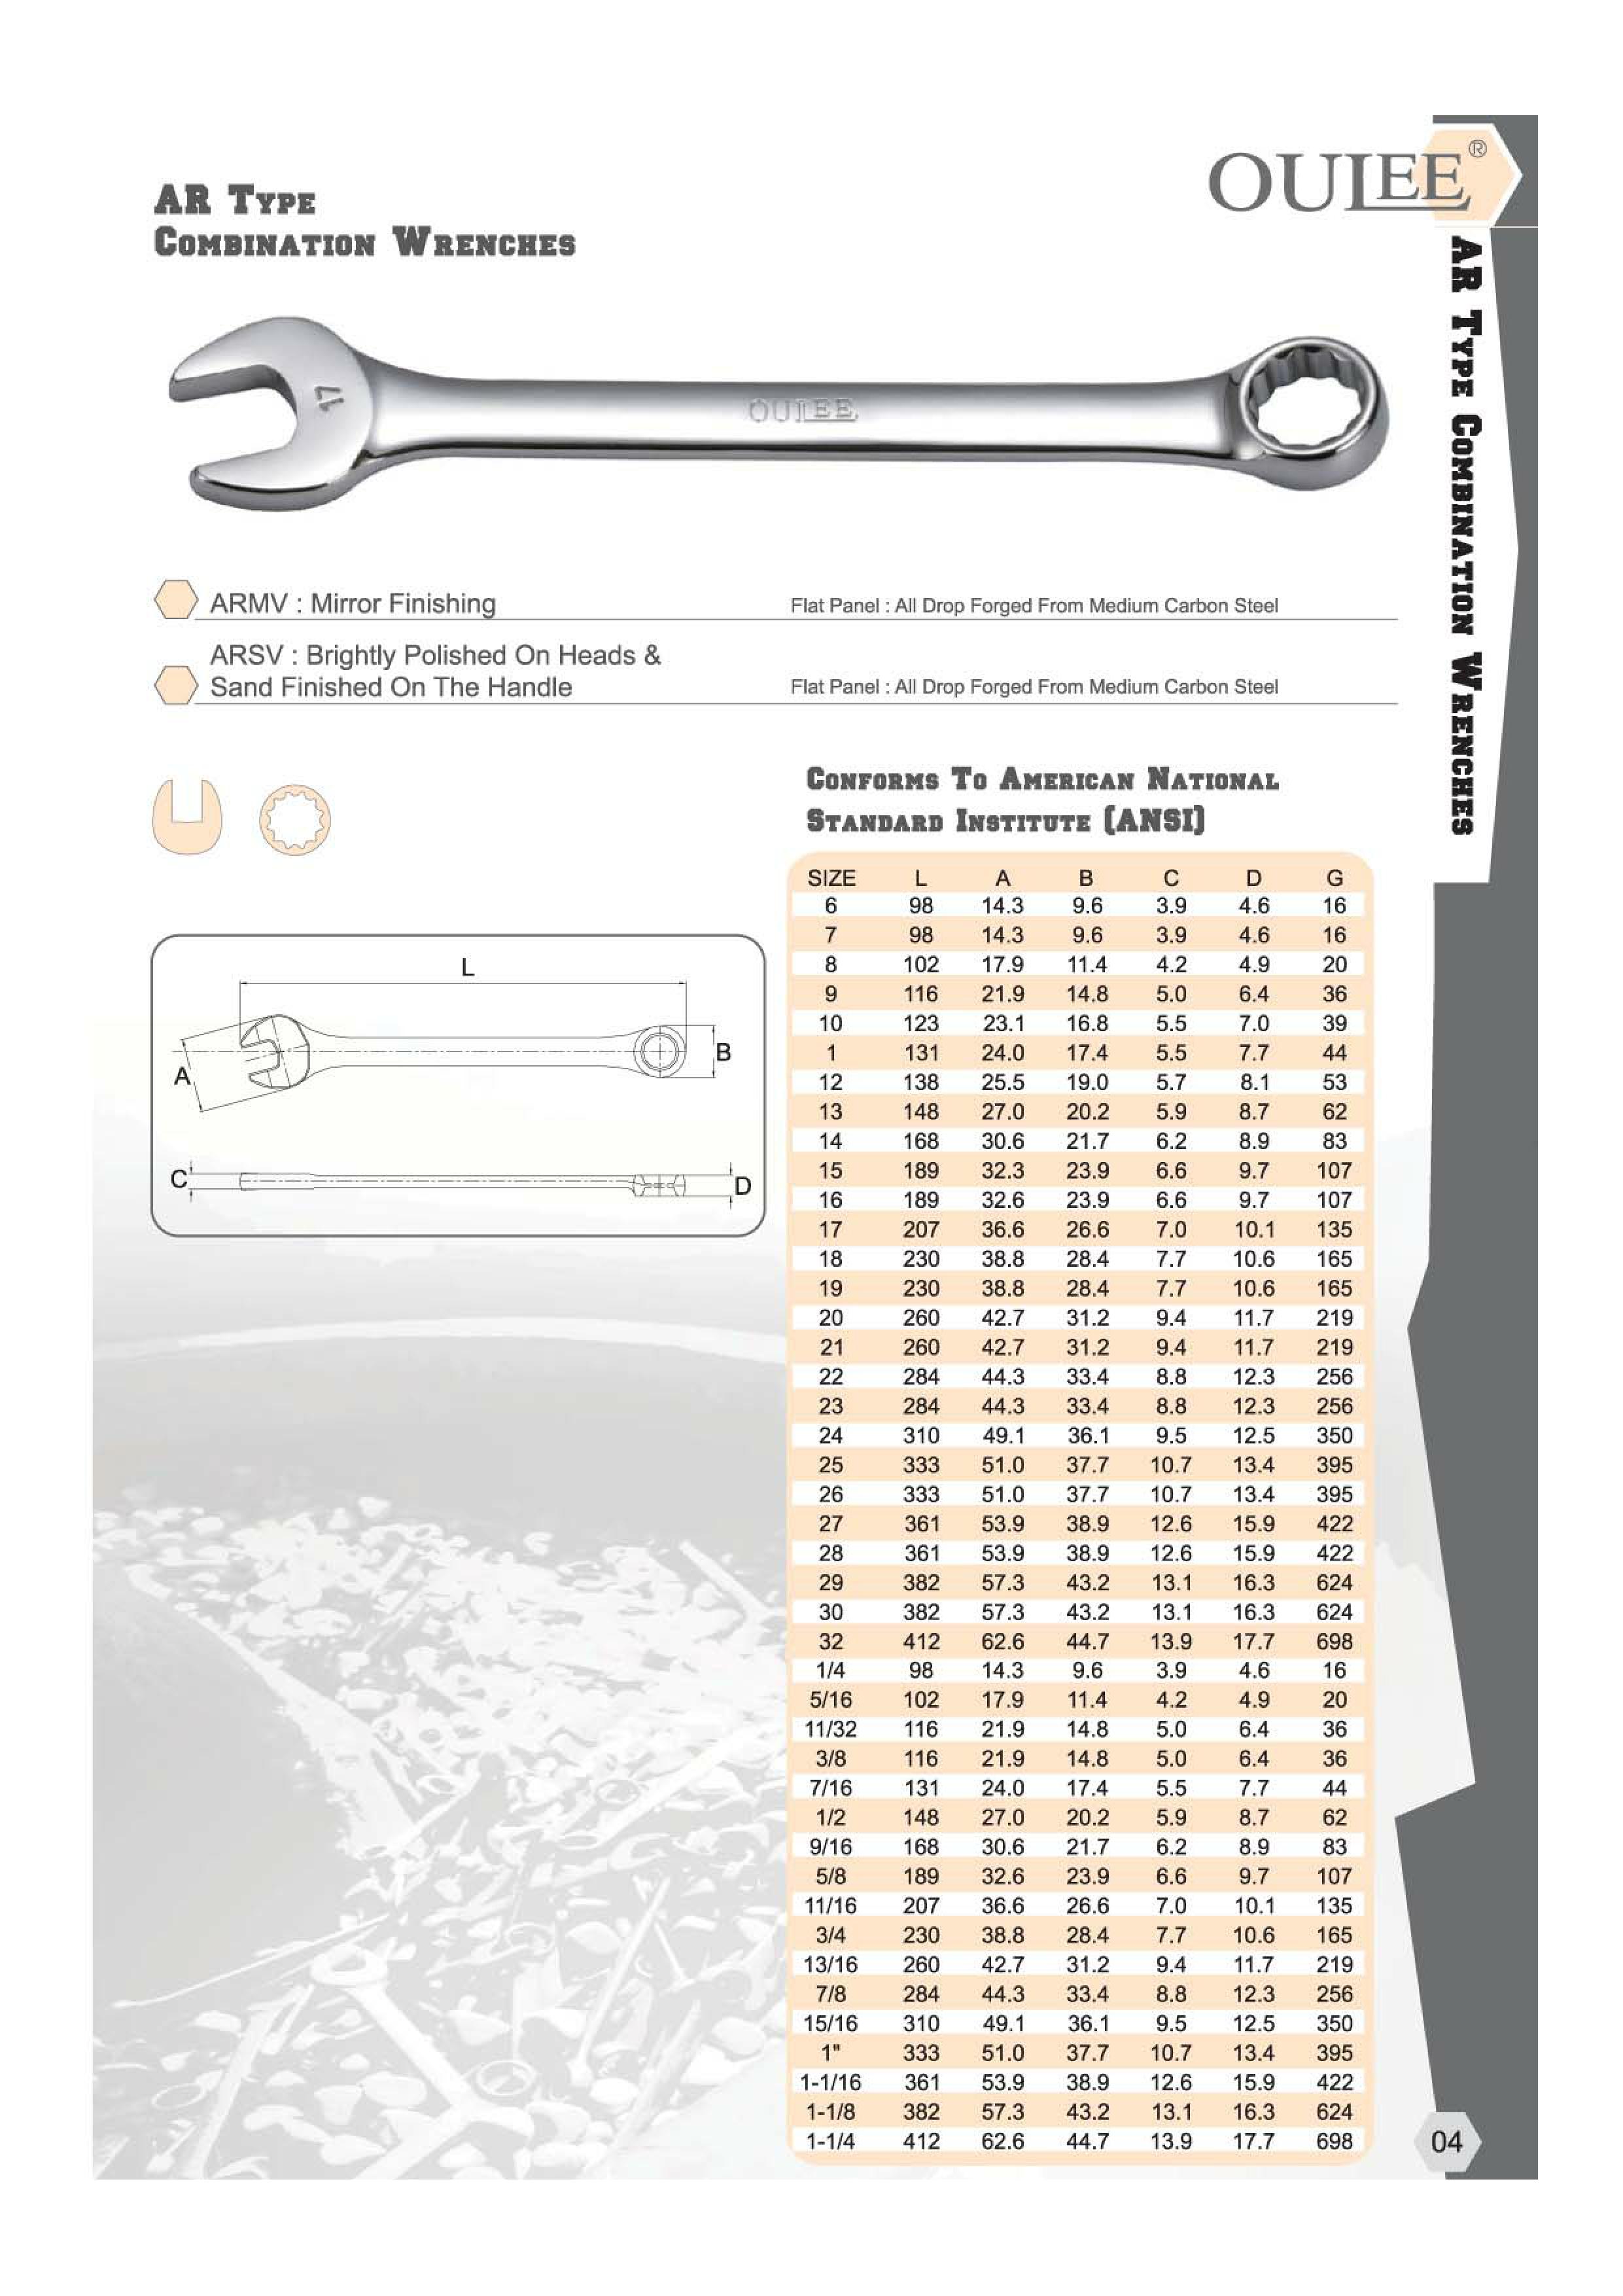 AR type combination wrenches